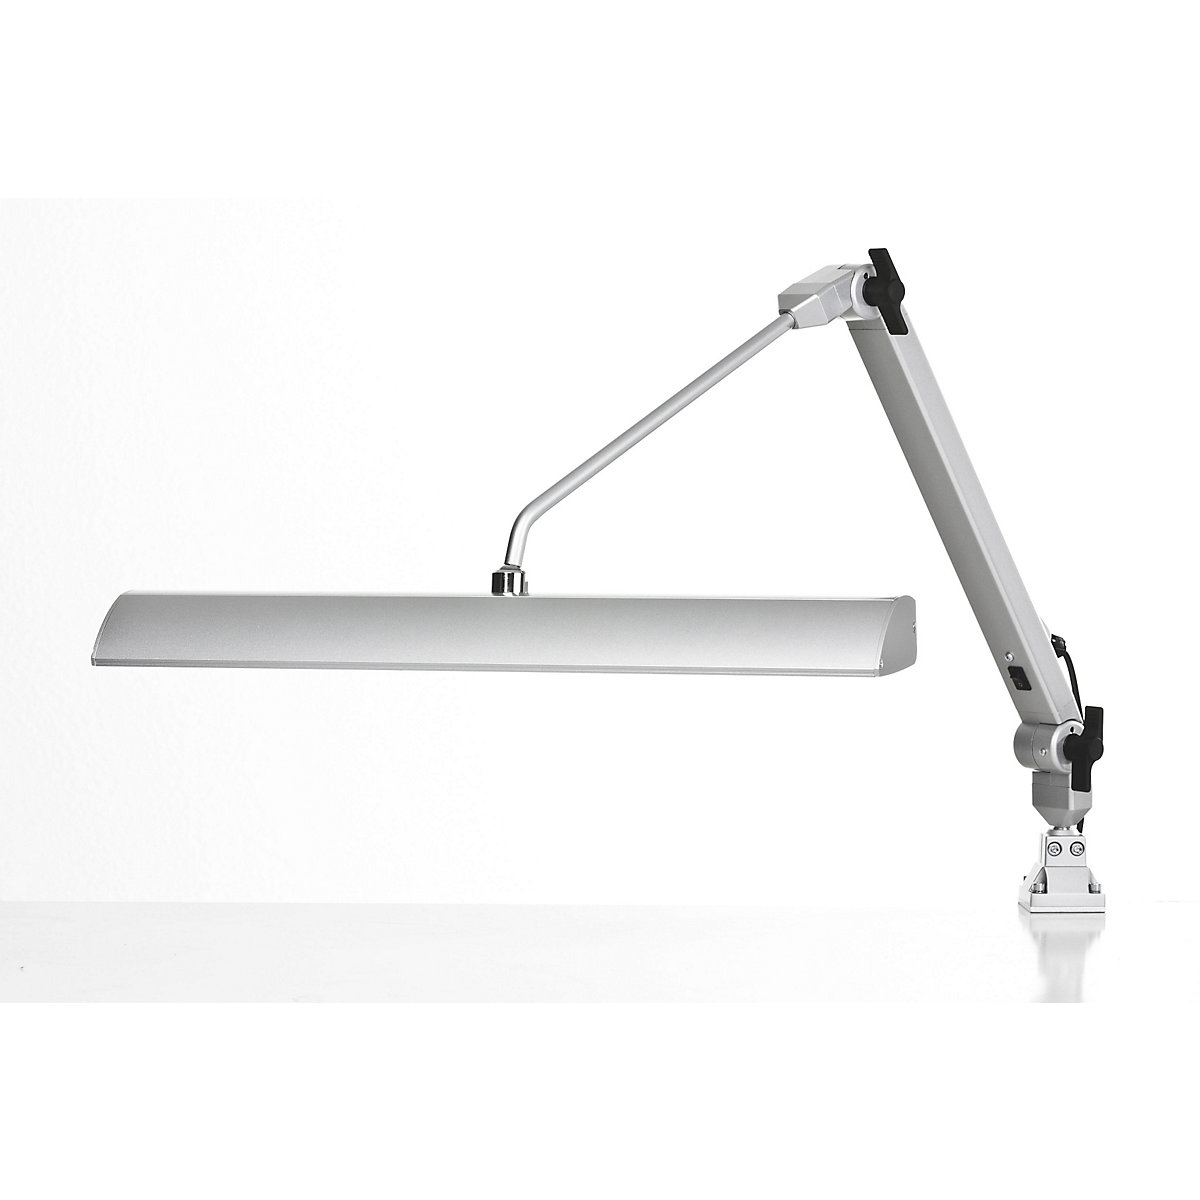 Universal Led Articulated Lamp Power, Articulated Desk Lamp Kit